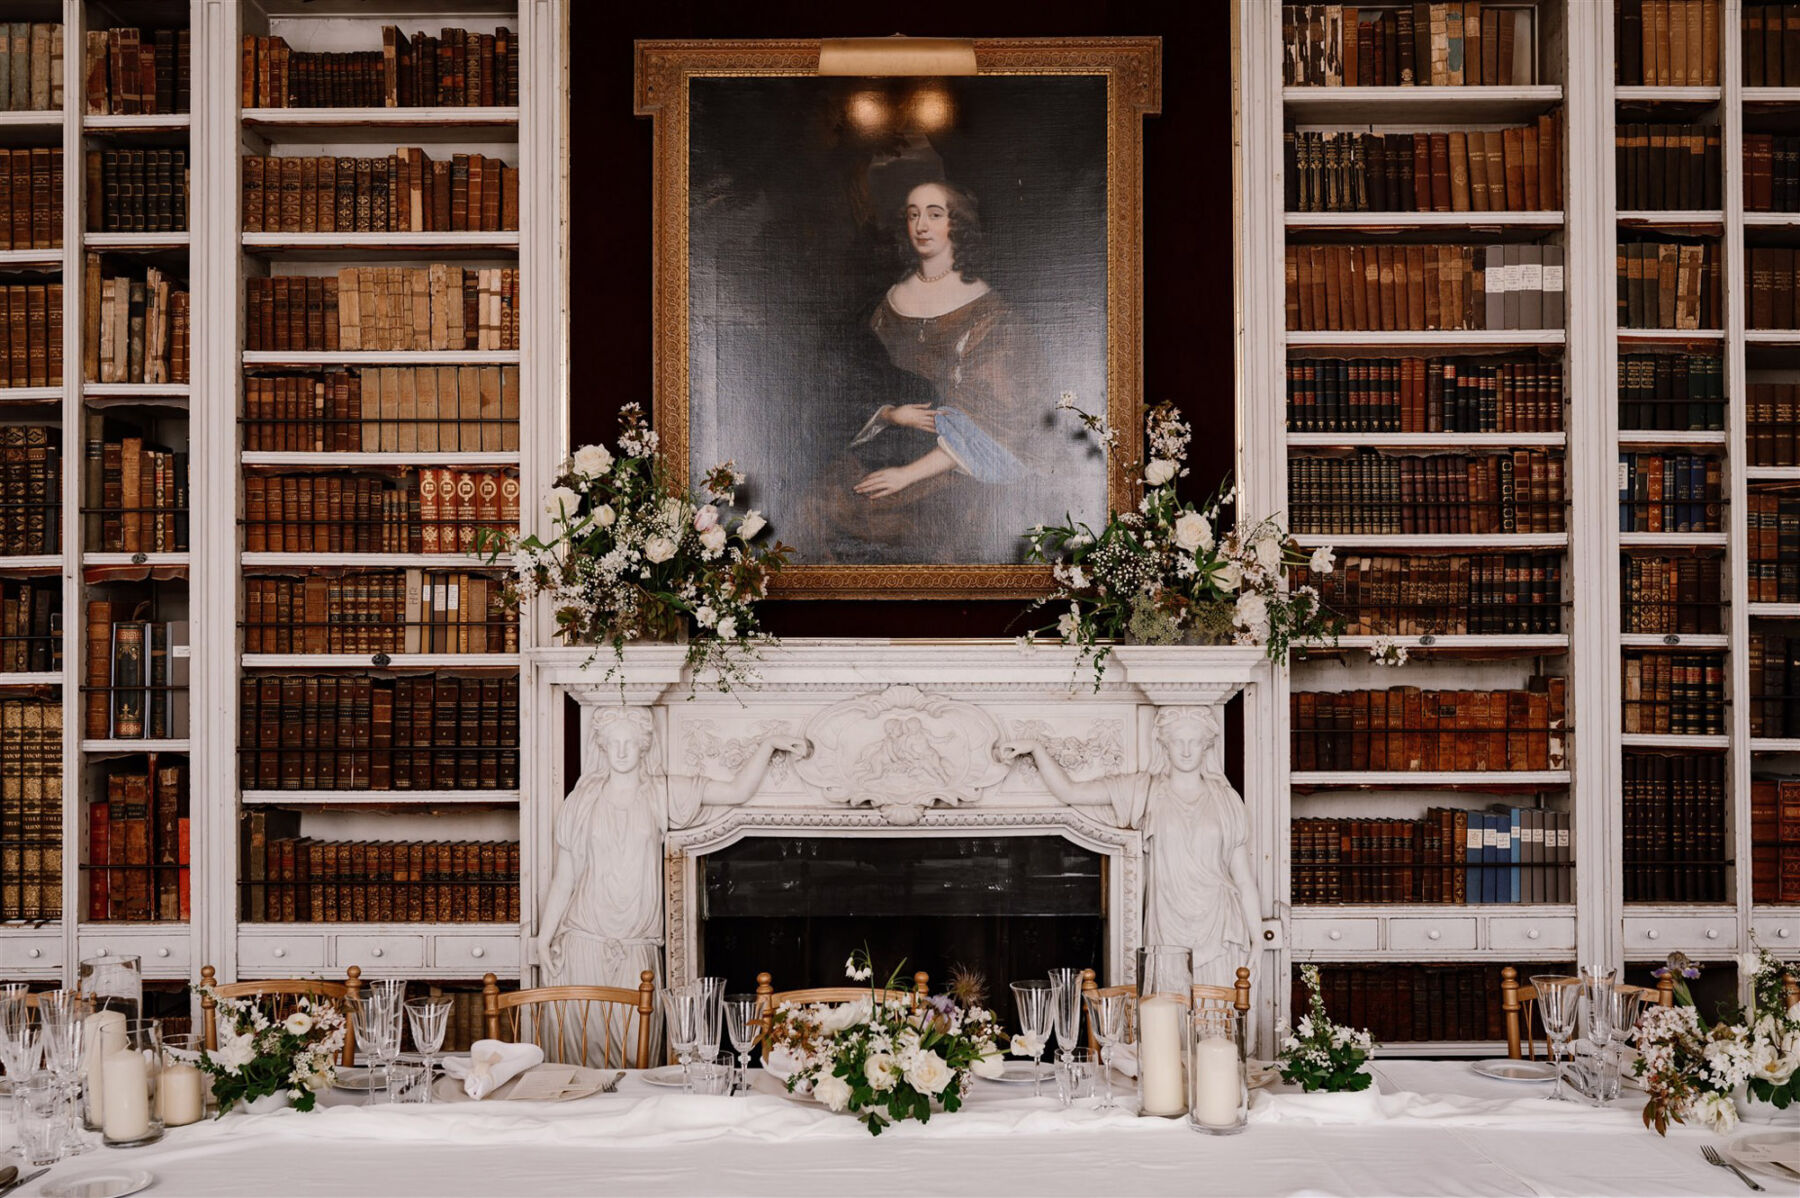 Floral fireplace wedding decor by Vervain Flowers, at St Giles House wedding venue, Dorset